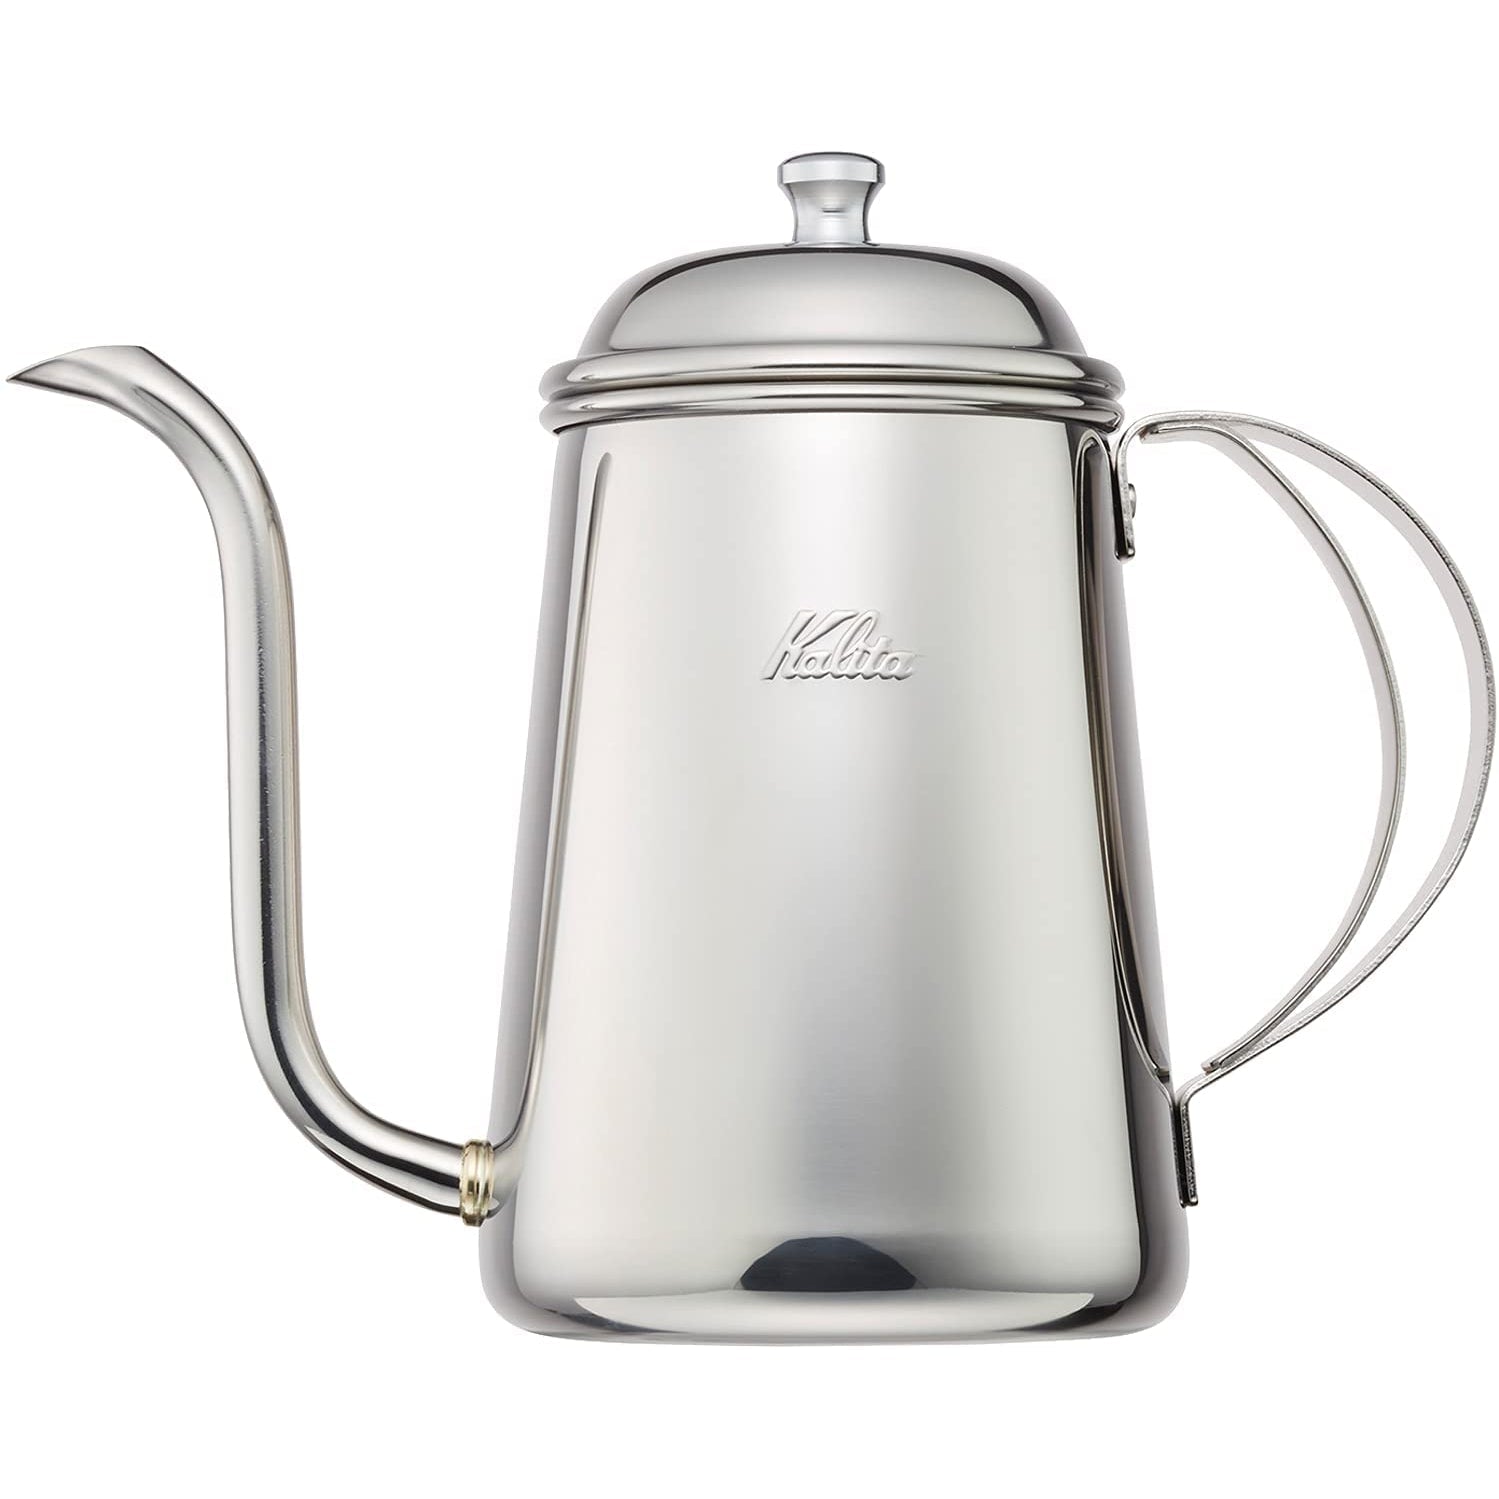 Kalita Pour Over Coffee Thin Spout Stainless Kettle 52272 0.7L